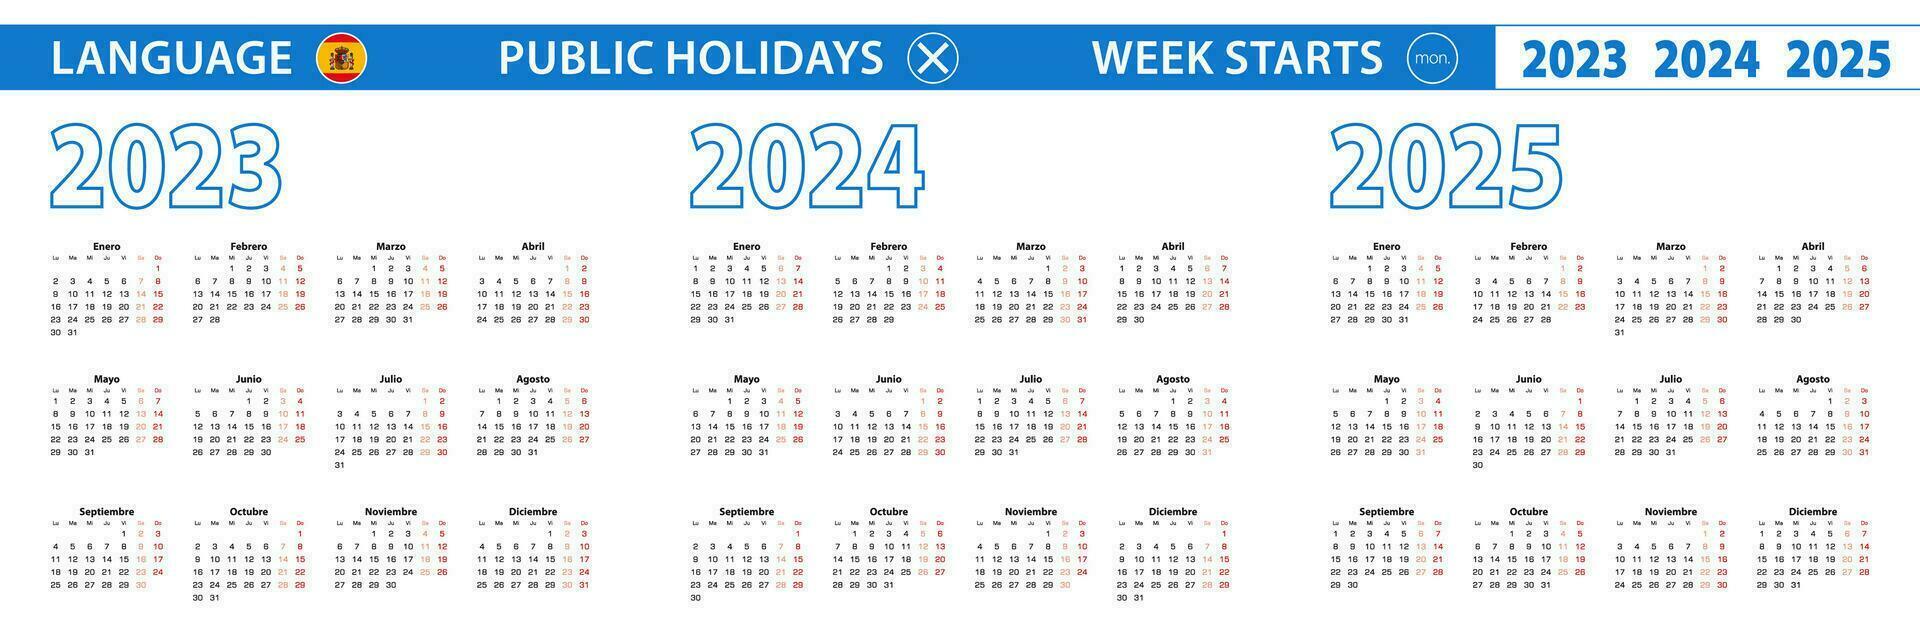 Simple calendar template in Spanish for 2023, 2024, 2025 years. Week starts from Monday. vector